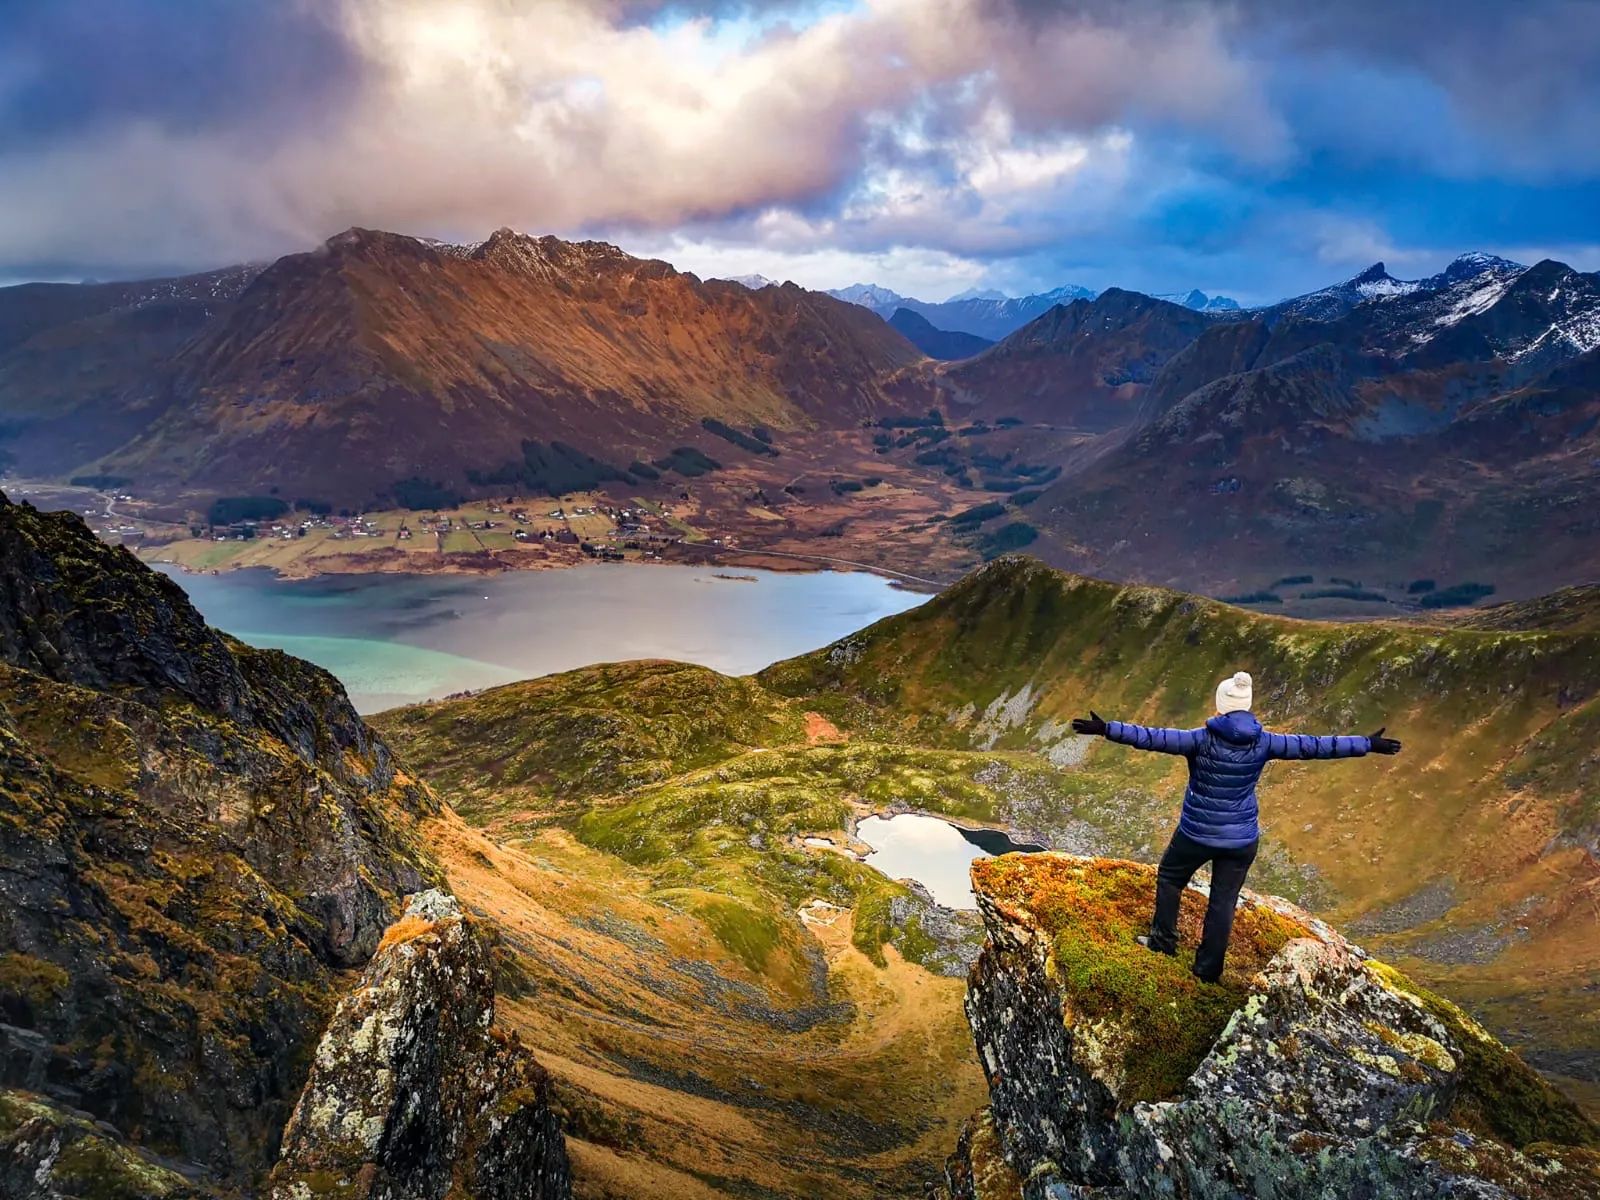 The view from the summit of Blåtiden, in the Lofoten Islands. Photo: Northern Explorer.